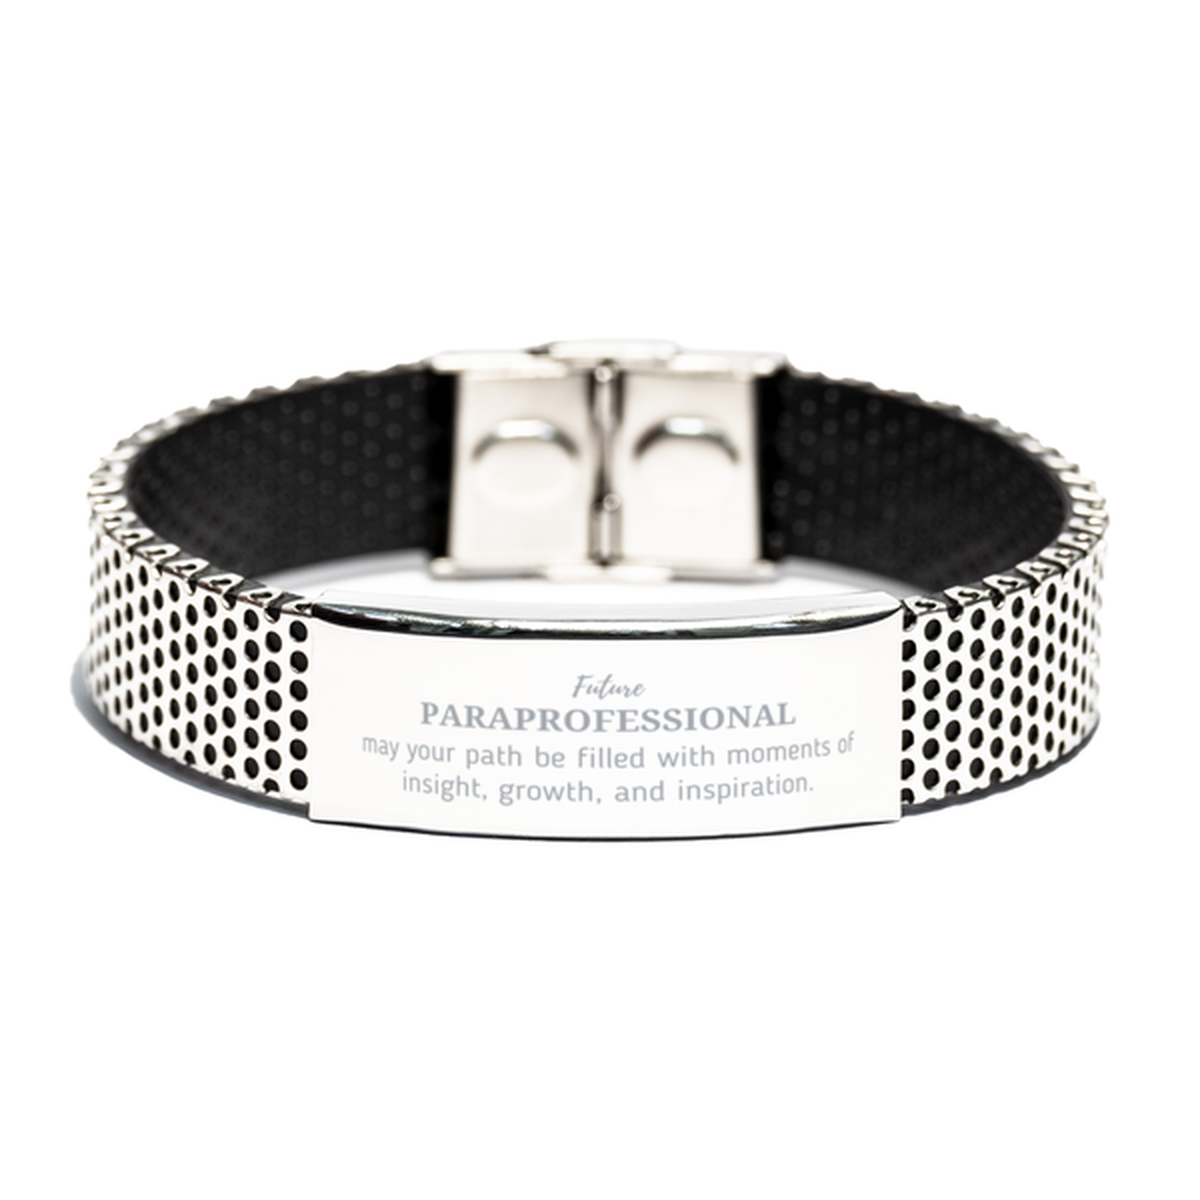 Future Paraprofessional Gifts, May your path be filled with moments of insight, Graduation Gifts for New Paraprofessional, Christmas Unique Stainless Steel Bracelet For Men, Women, Friends